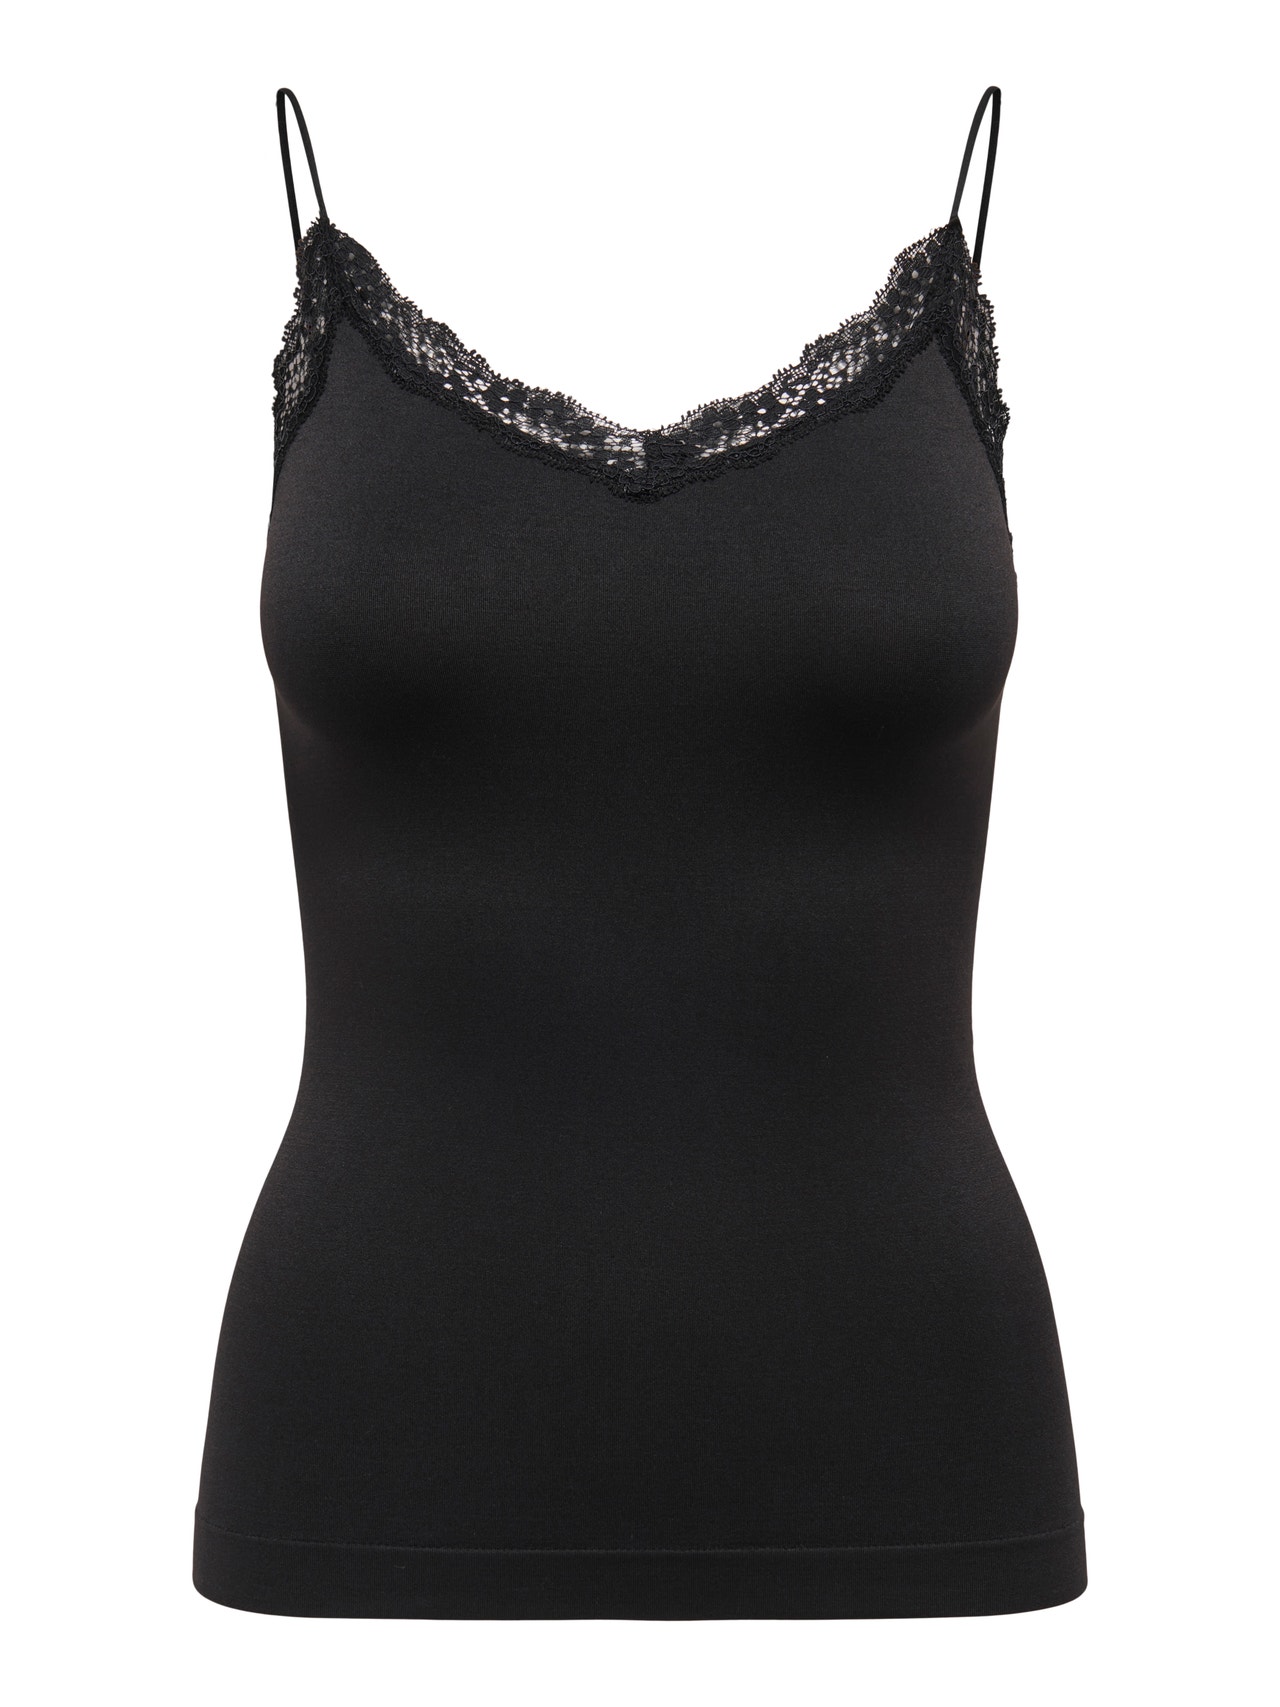 ONLY Sin costuras Top -Black - 15249083